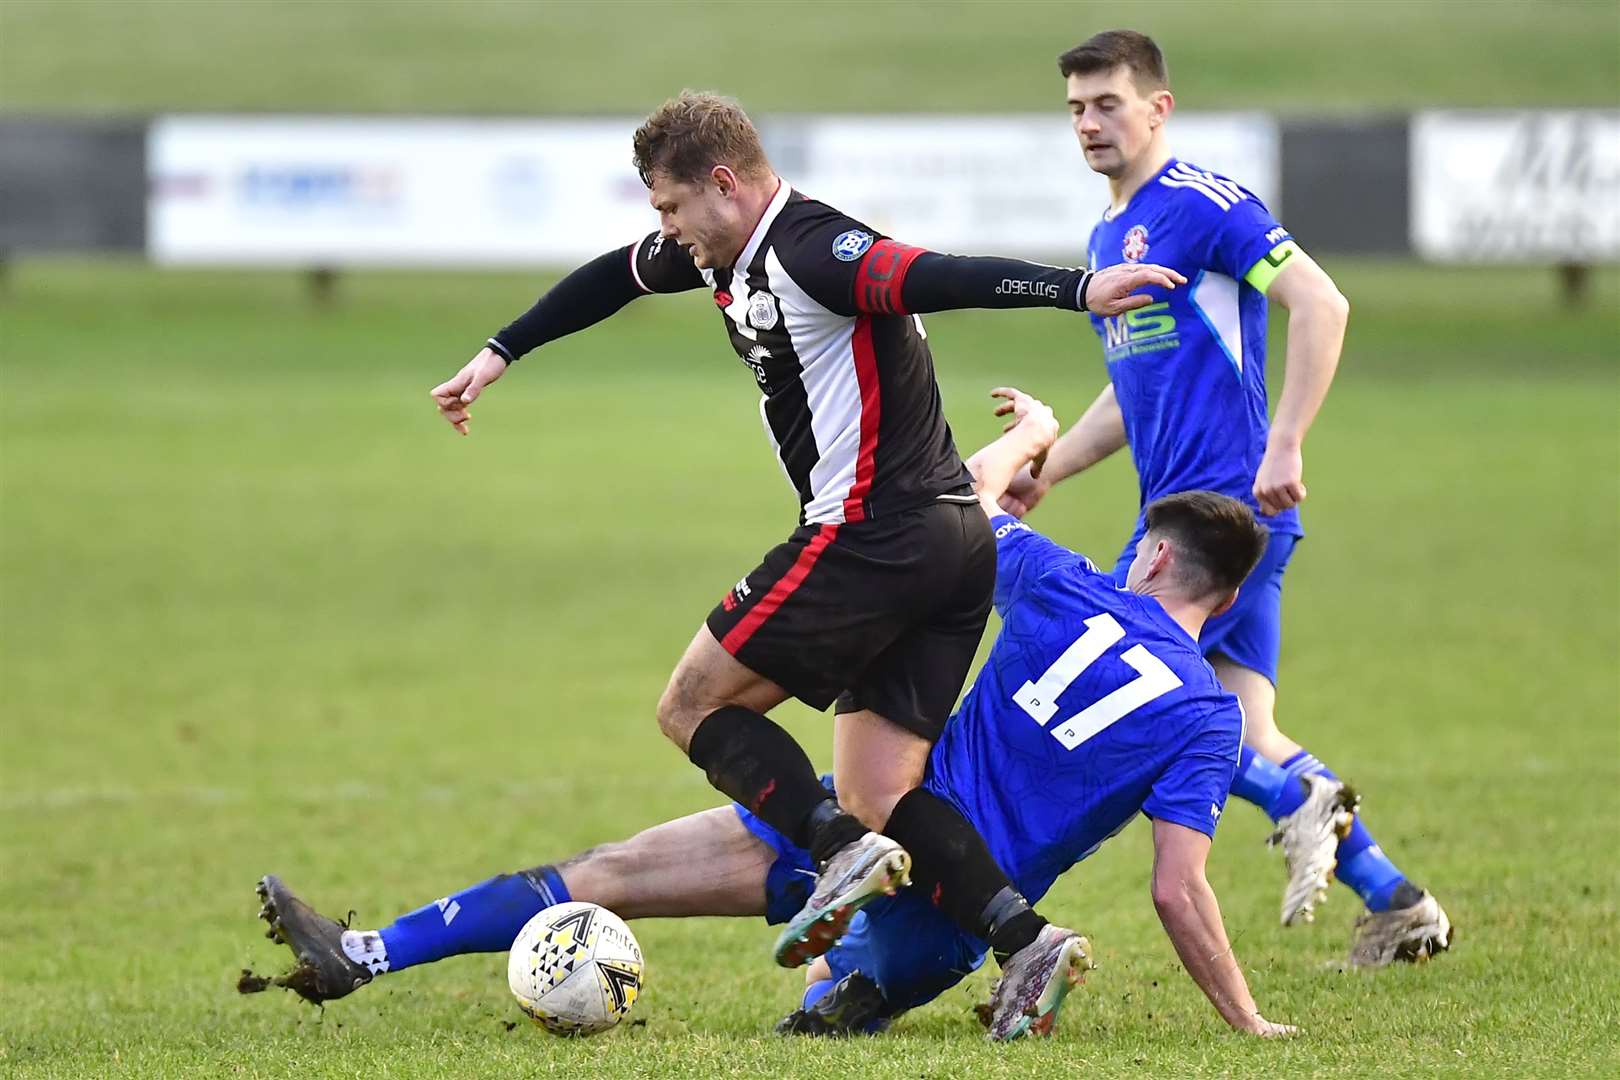 Lossiemouth's Jared Kennedy slides in to try and stop Wick captain Jack Halliday. Picture: Mel Roger